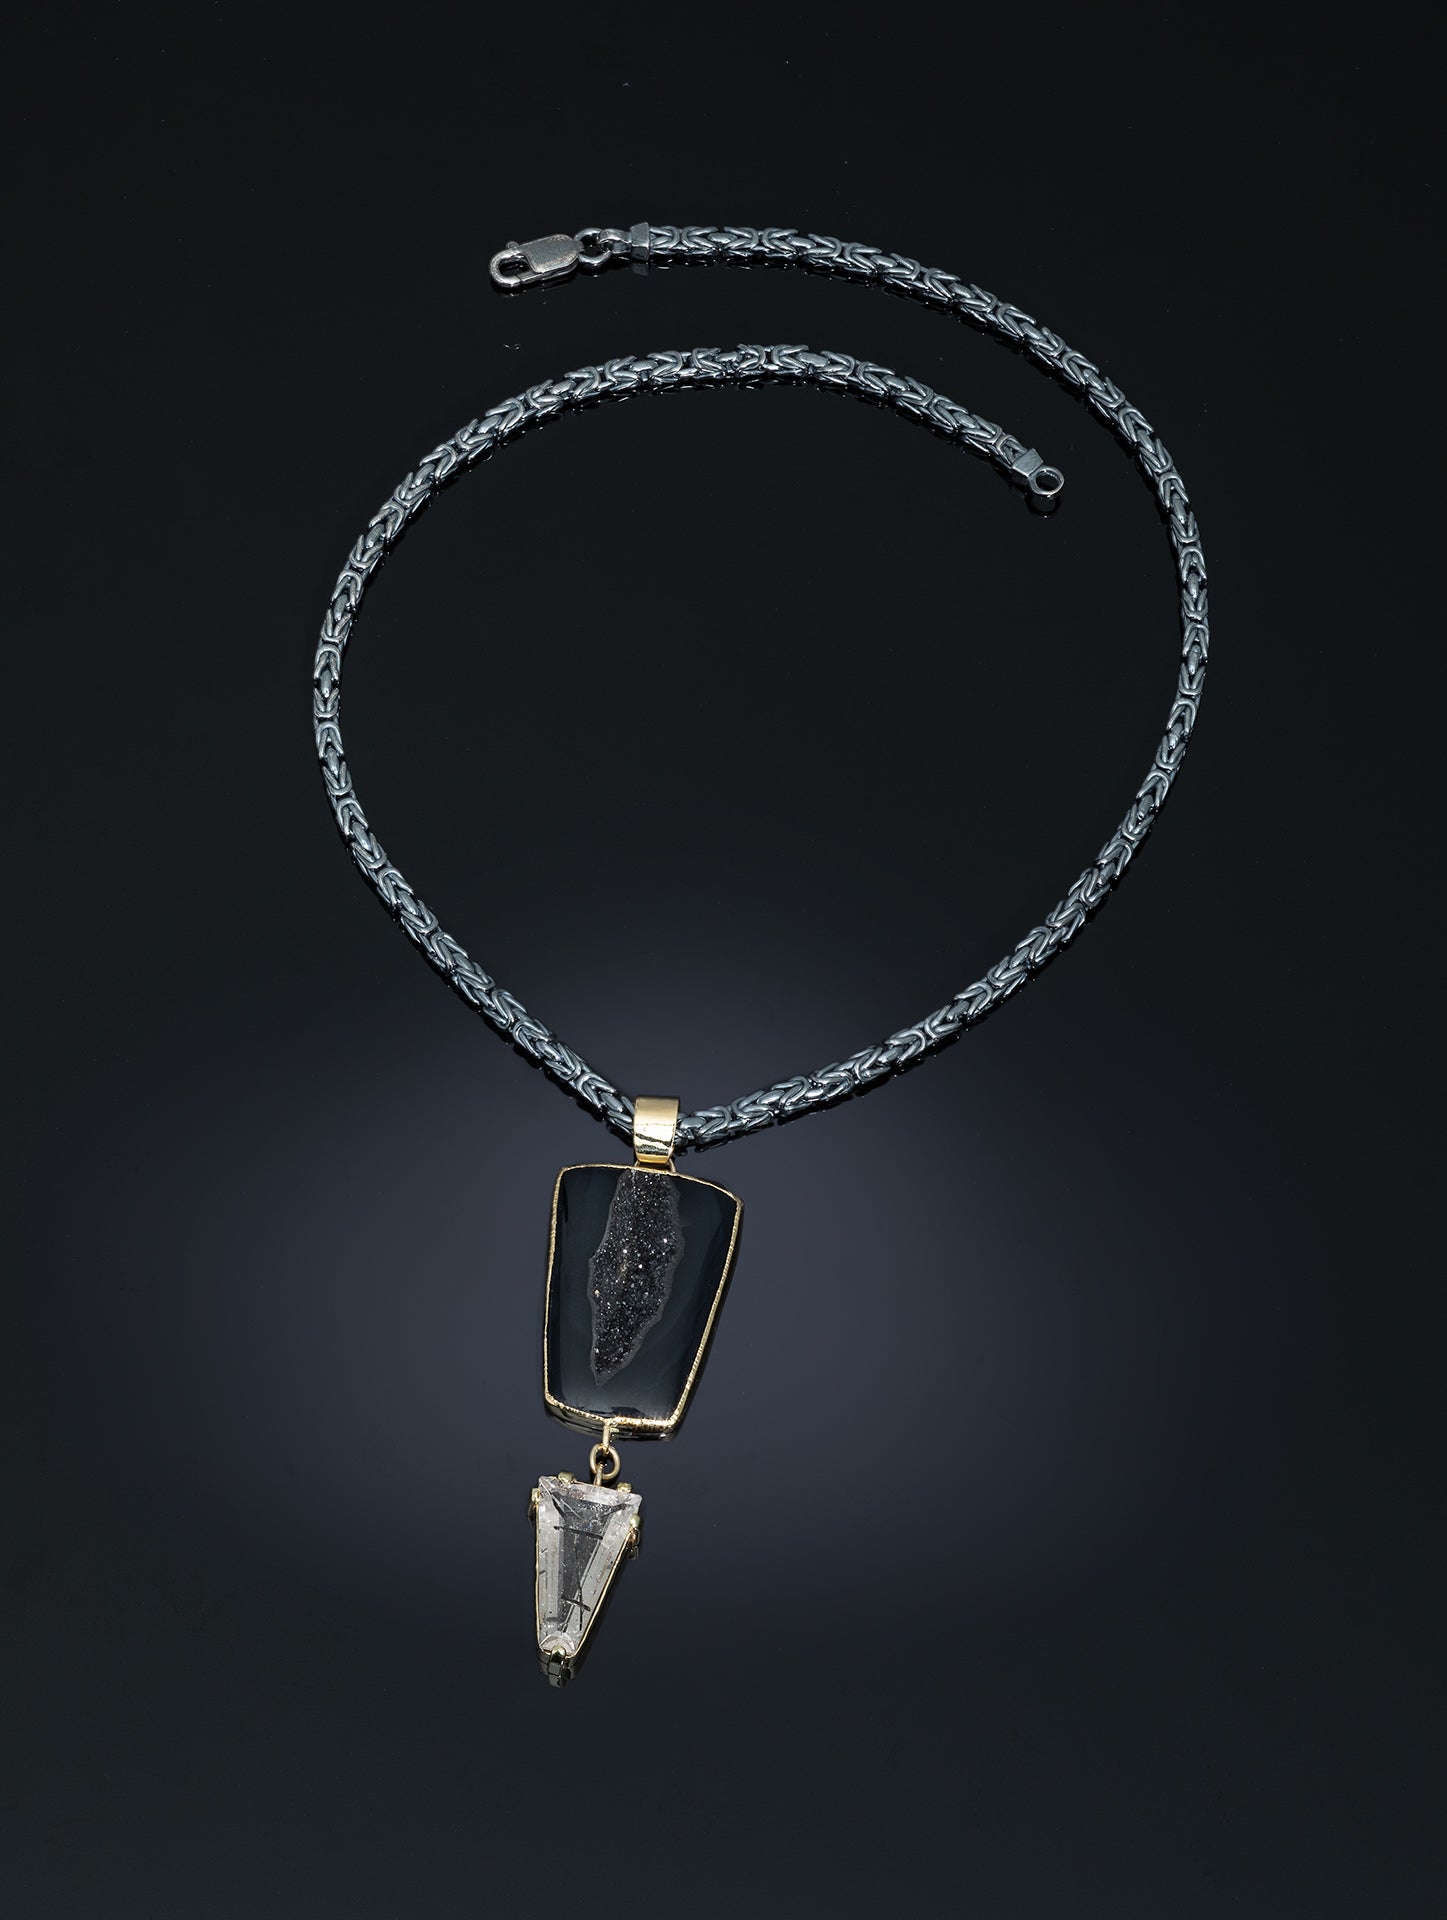 "Byzantium" - Black onyx drusy and triangular rutilated quartz in 18k g and sterling on sterling chain